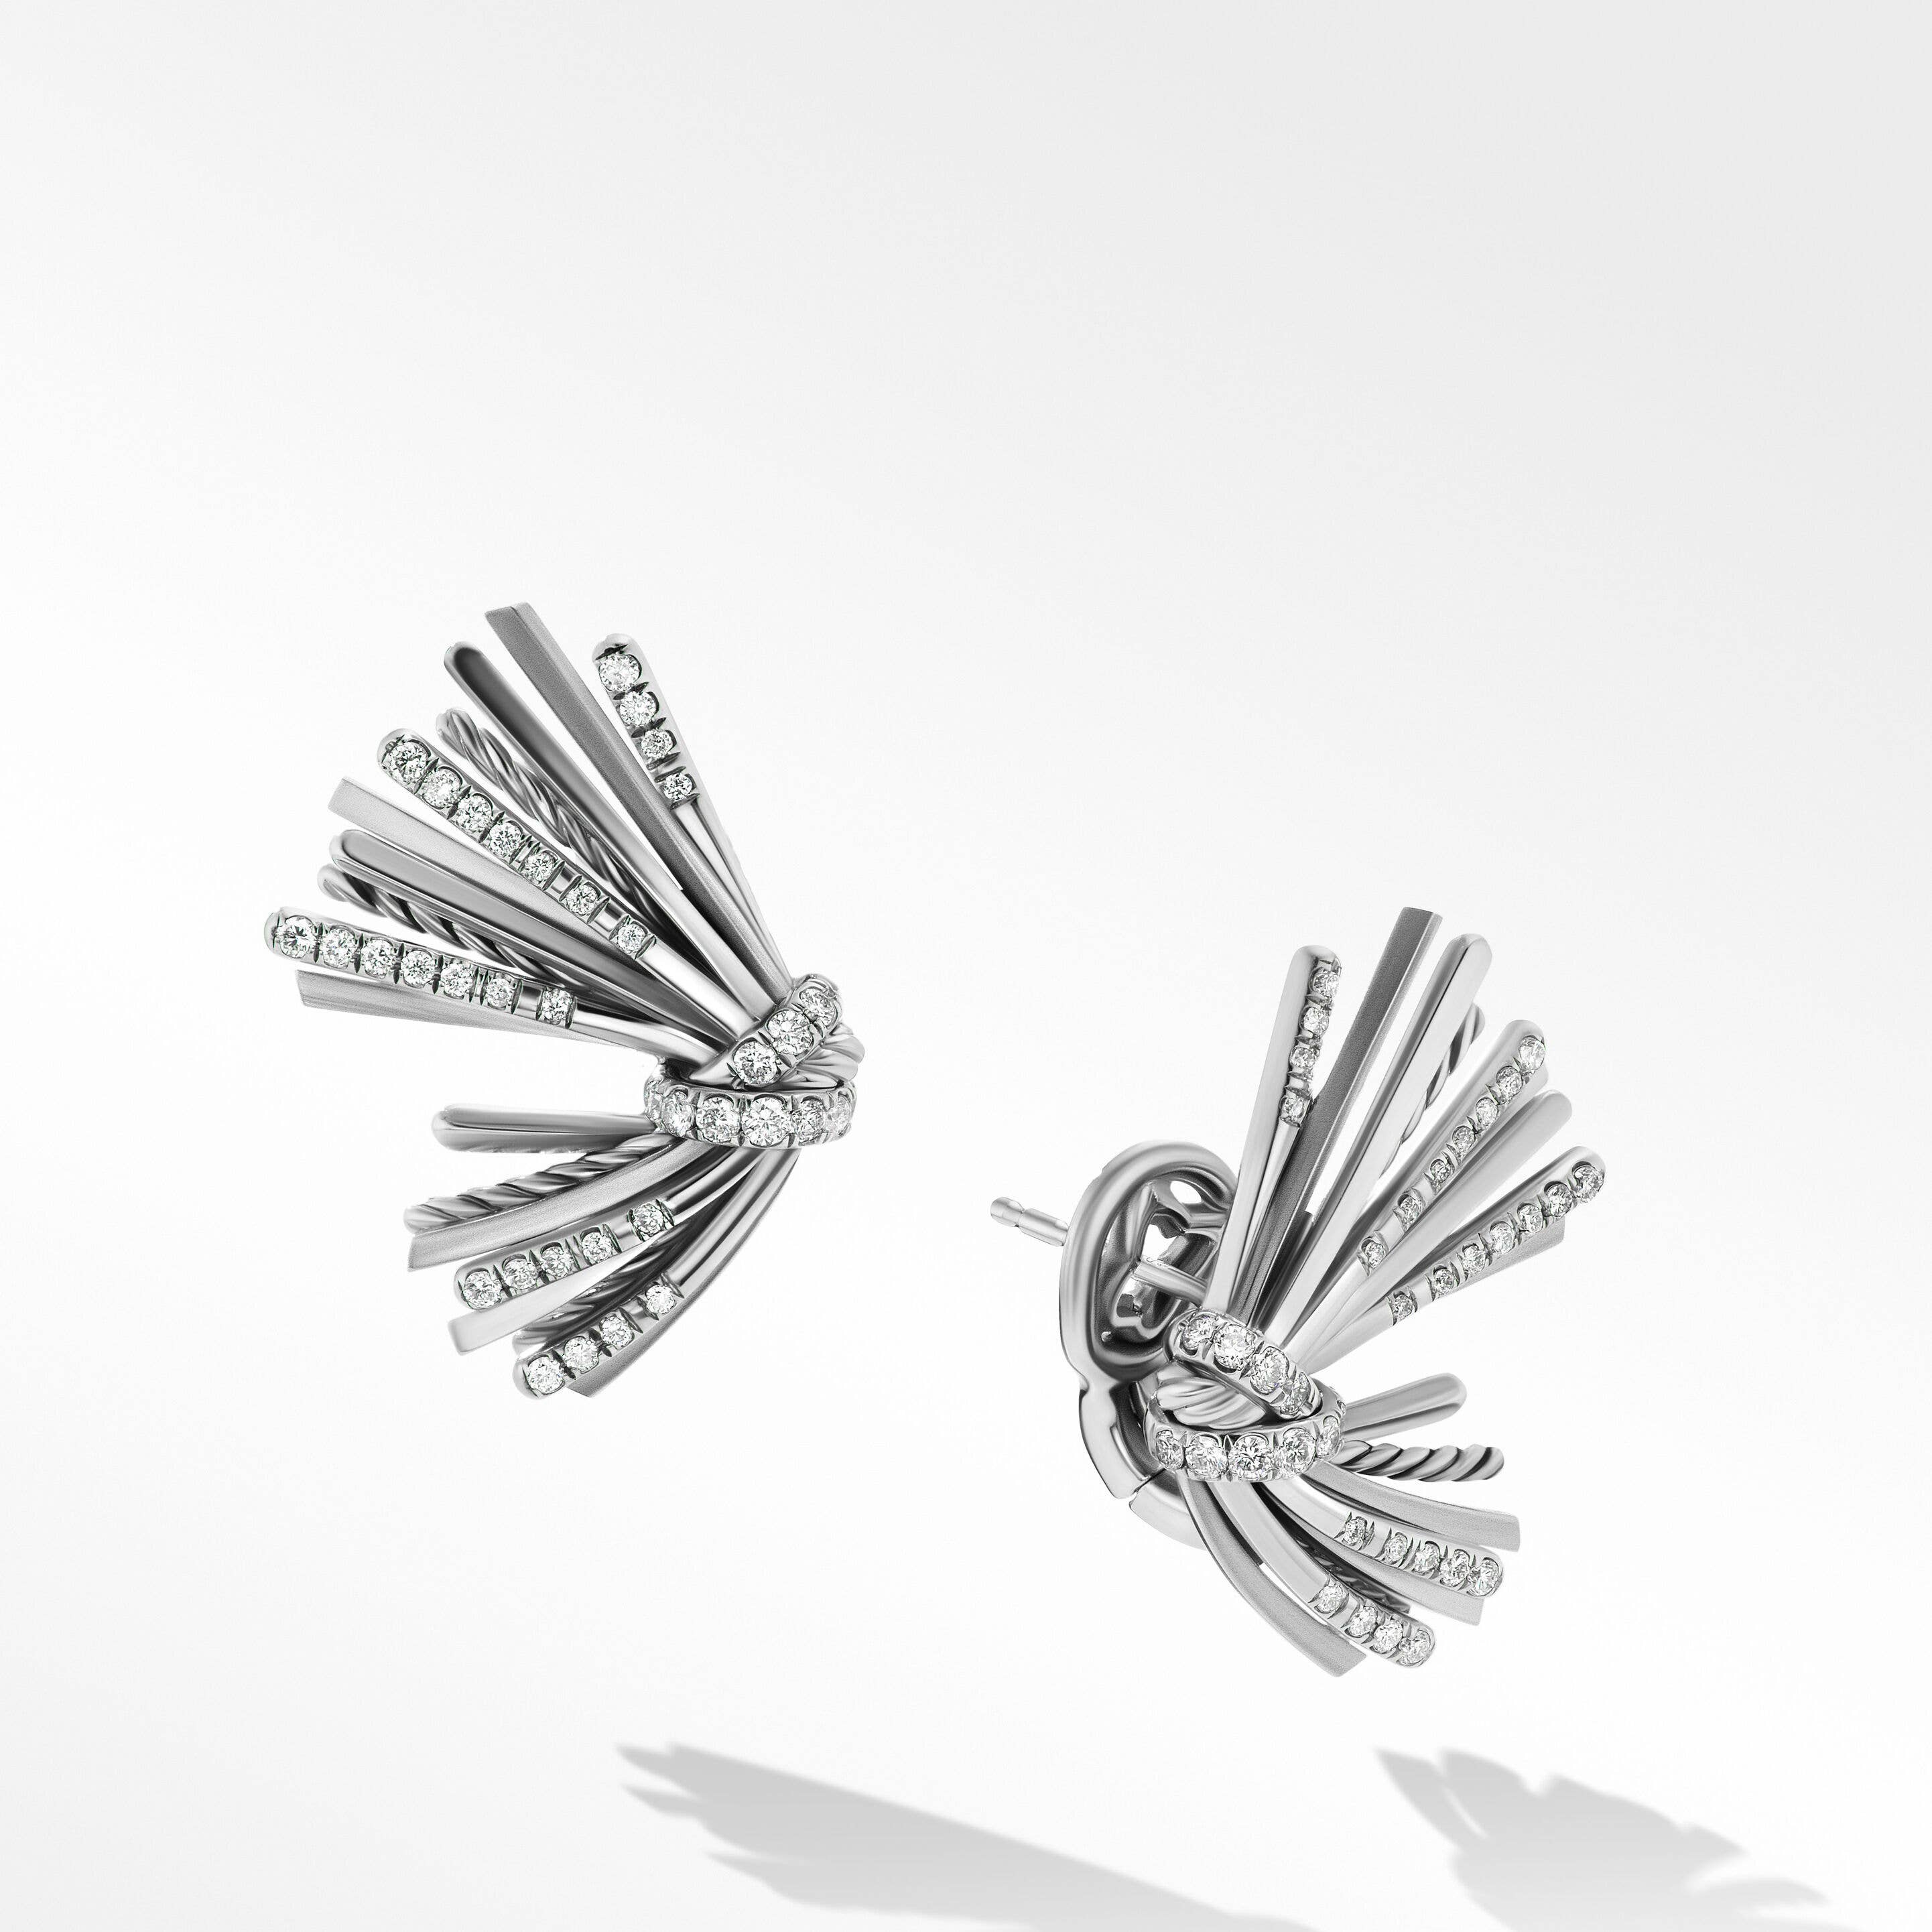 Angelika™ Flair Earrings in Sterling Silver with Pavé Diamonds